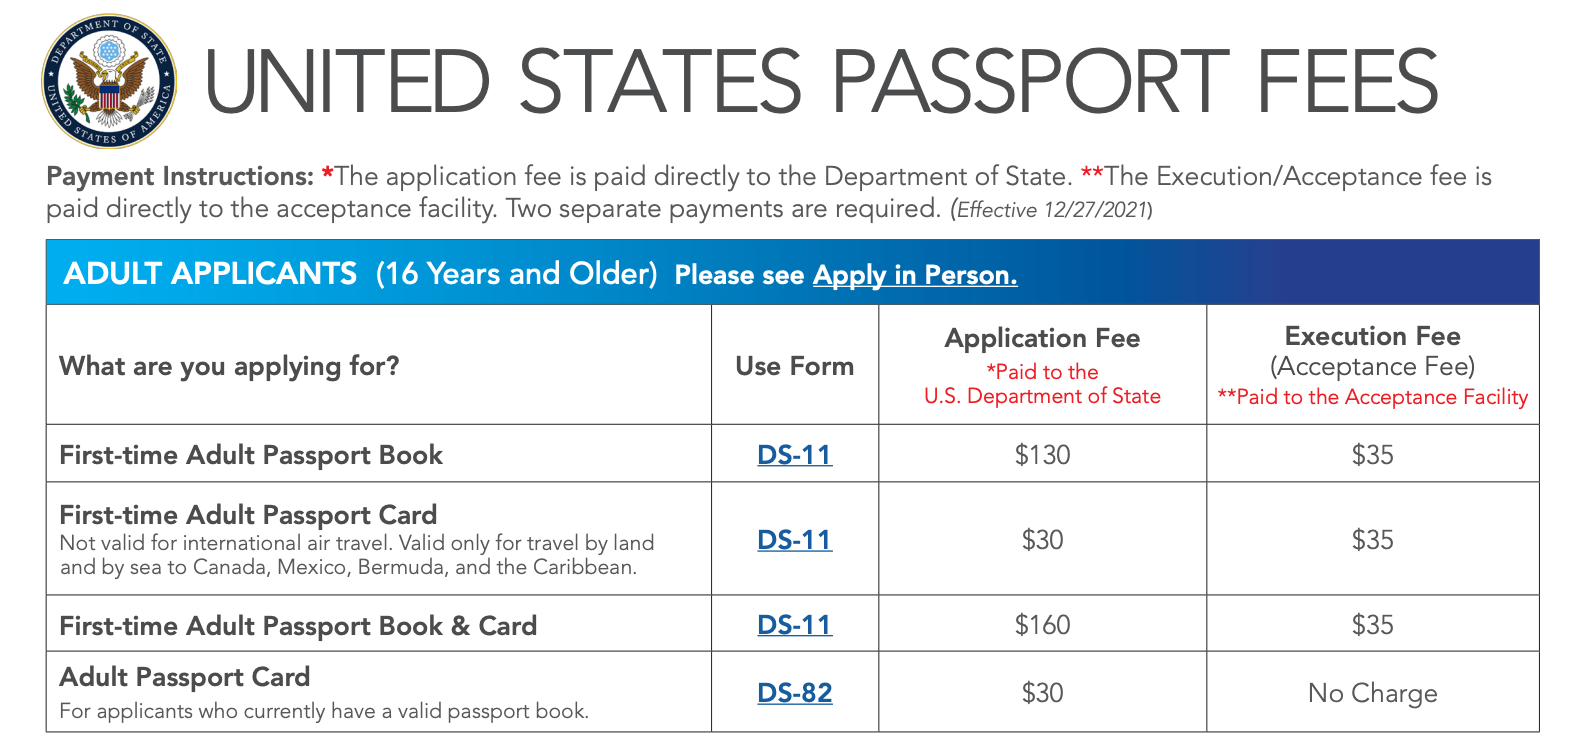 First time Adult passport applicant fees